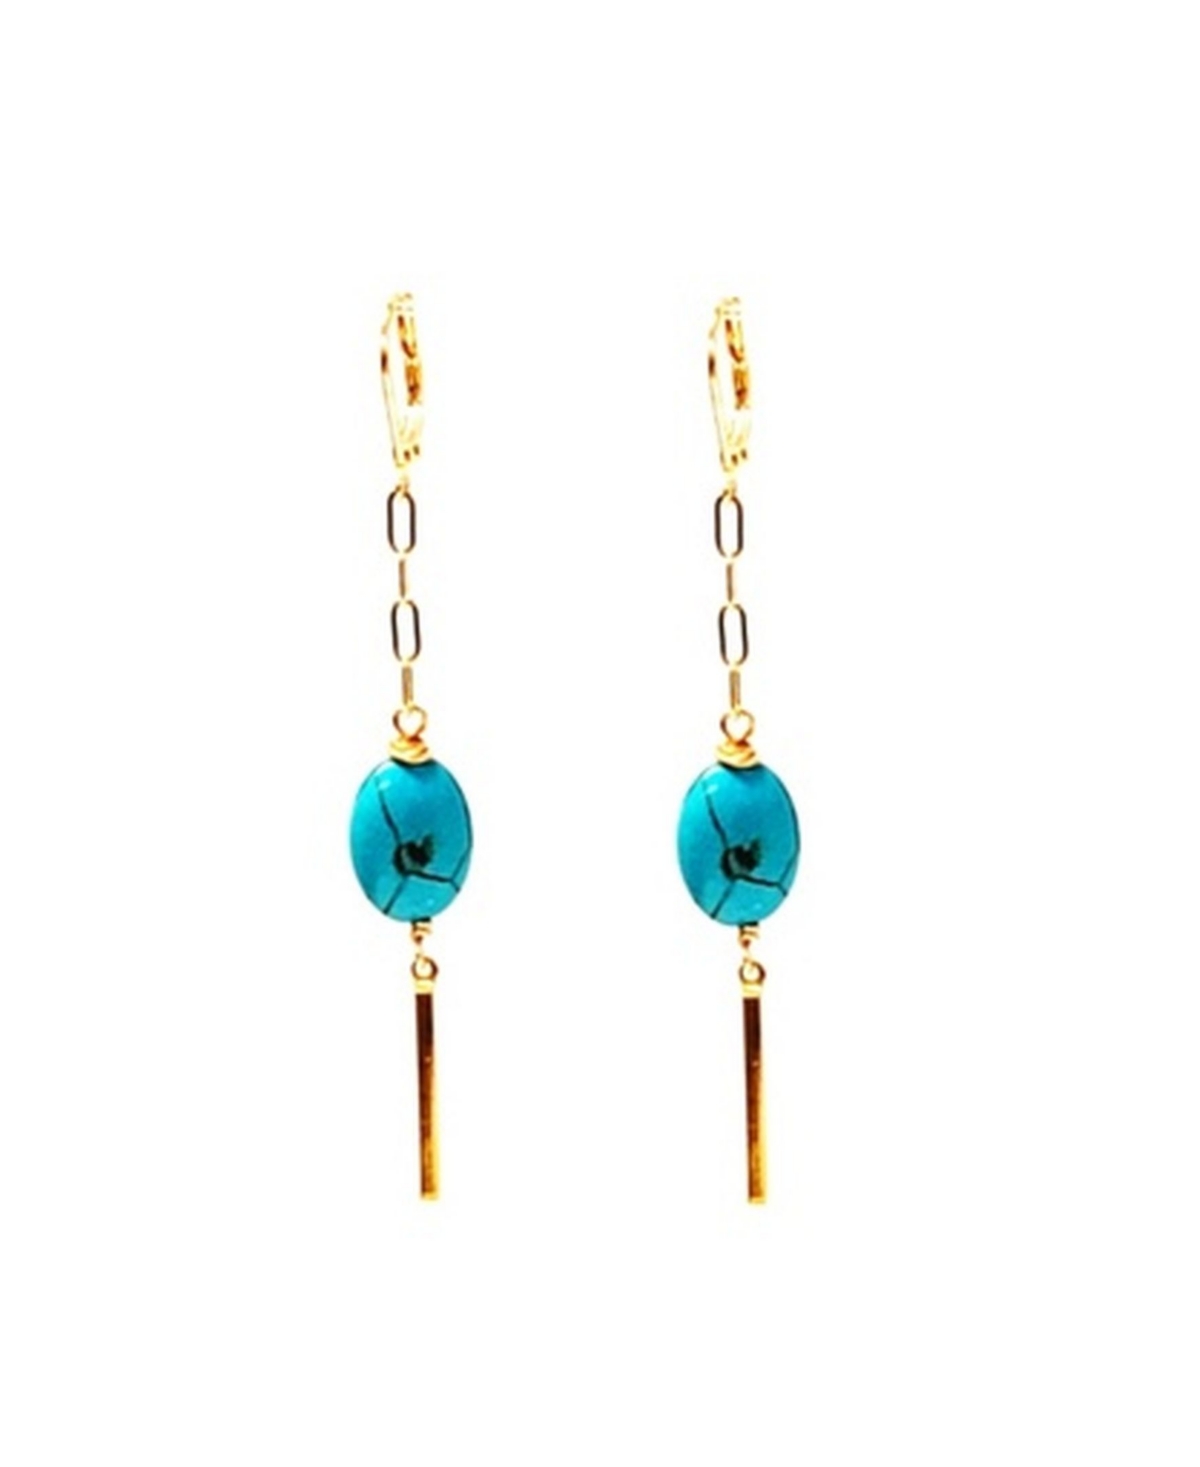 Women's Bar Drop Earrings with Turquoise Stones - Gold-tone